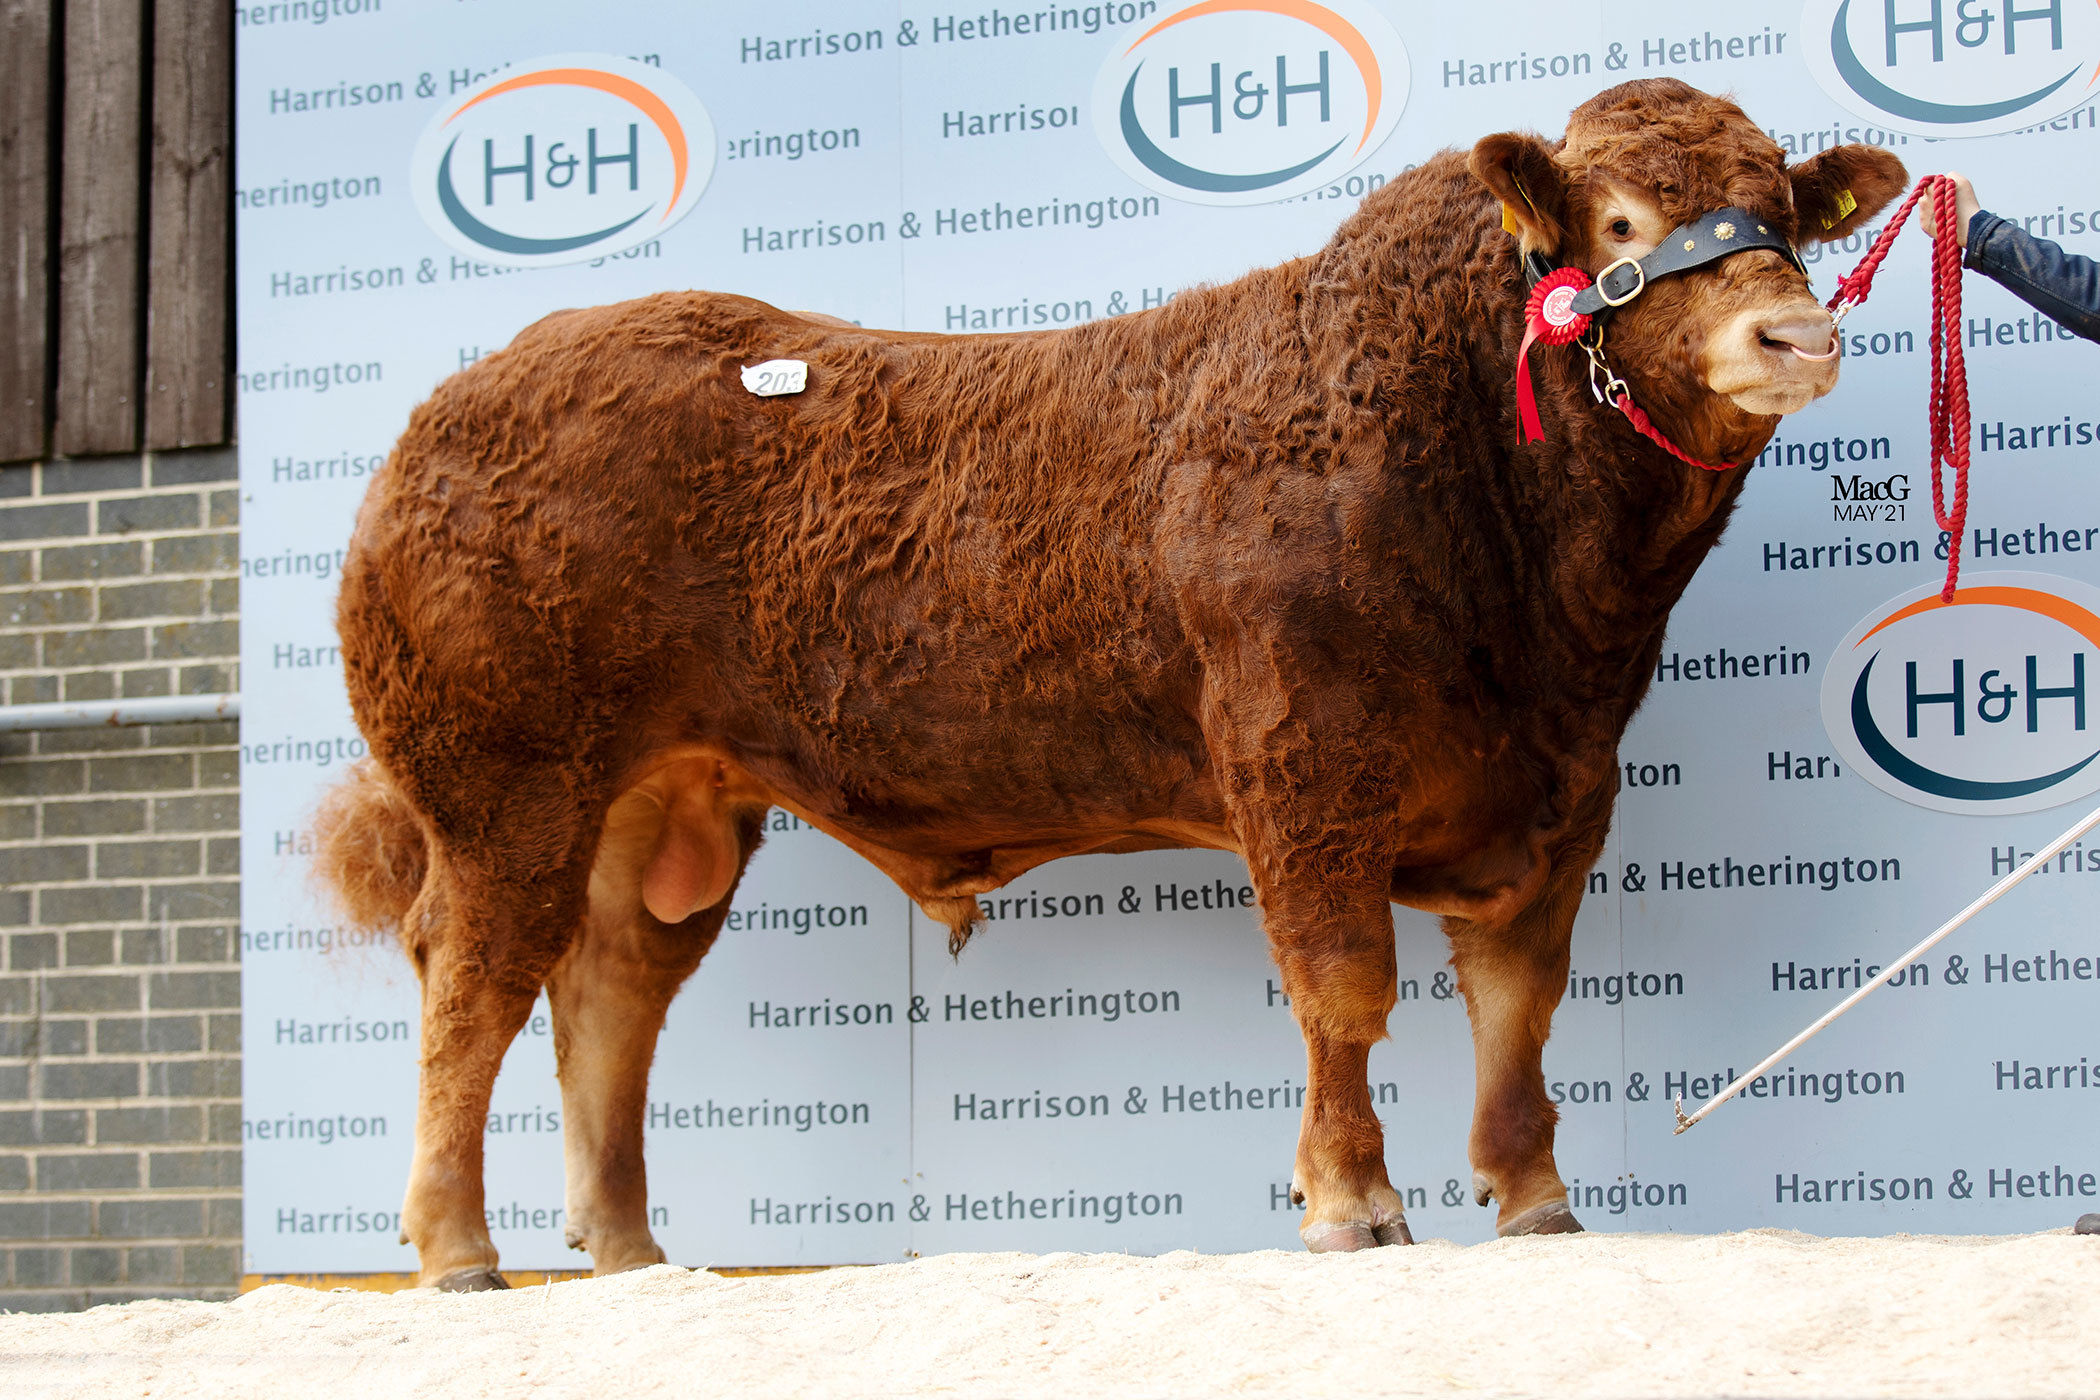 Top for Ian and Andrew Nimmo was 14,000gns for Maraiscote Pomagne